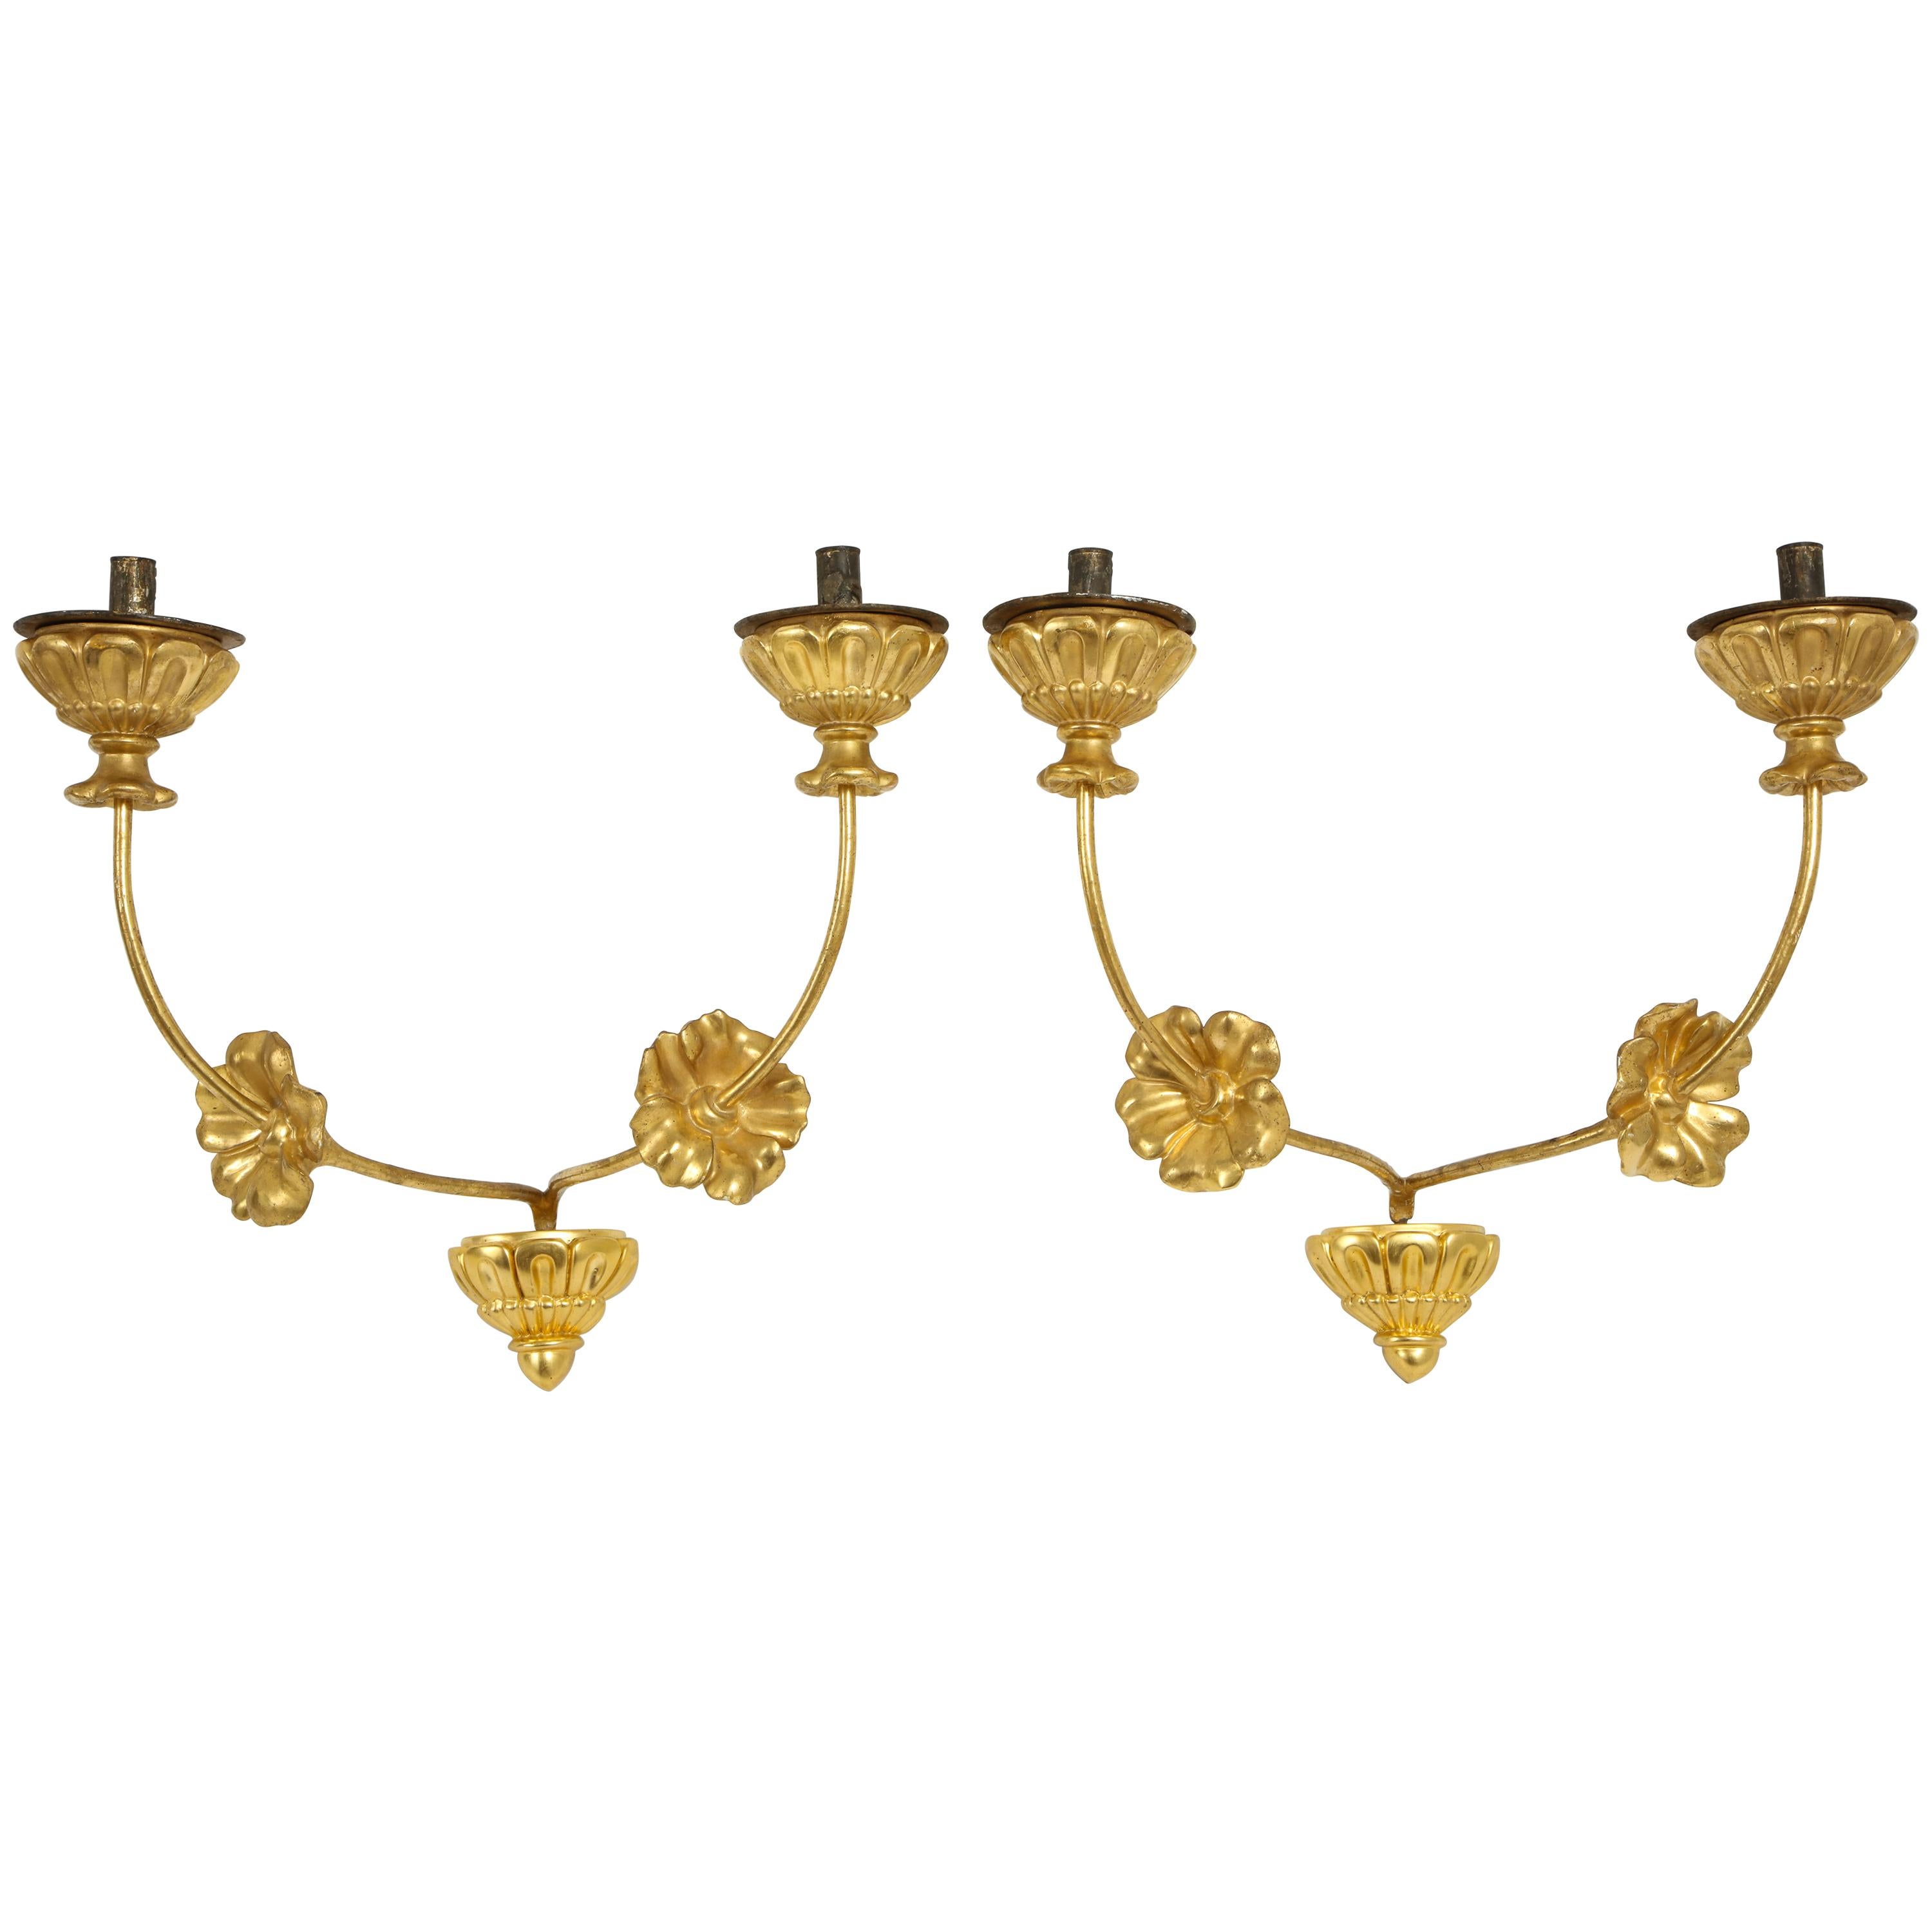 Pair of Neoclassic Italian Carved and Gilded Iron Wall Sconces